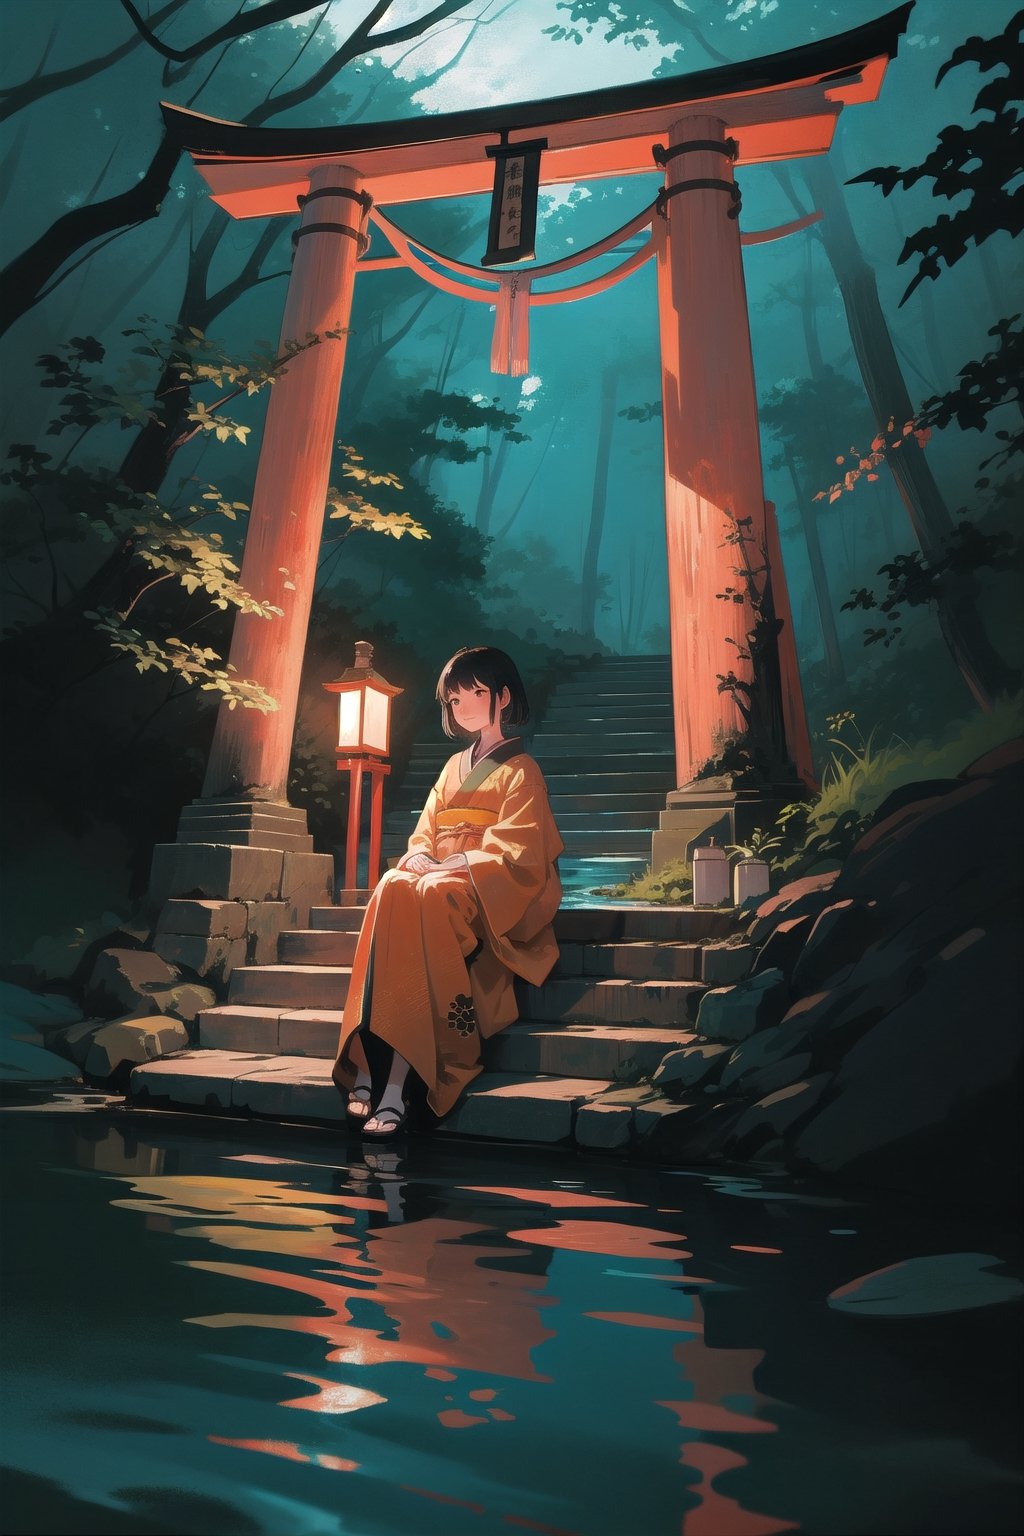 1girl sitting in front of a torii, in the jungle, best quality, black hair, mist, kimono, moss, tree log, scenery, rainforest, vibrant color, low angle shot, vibrant color, cinematic lighting, calm, serenity, Japanese shrine, sitting, wood bridge, stairs, reflections, blue water pond, feet in water, shrine candles lights, atmospheric,